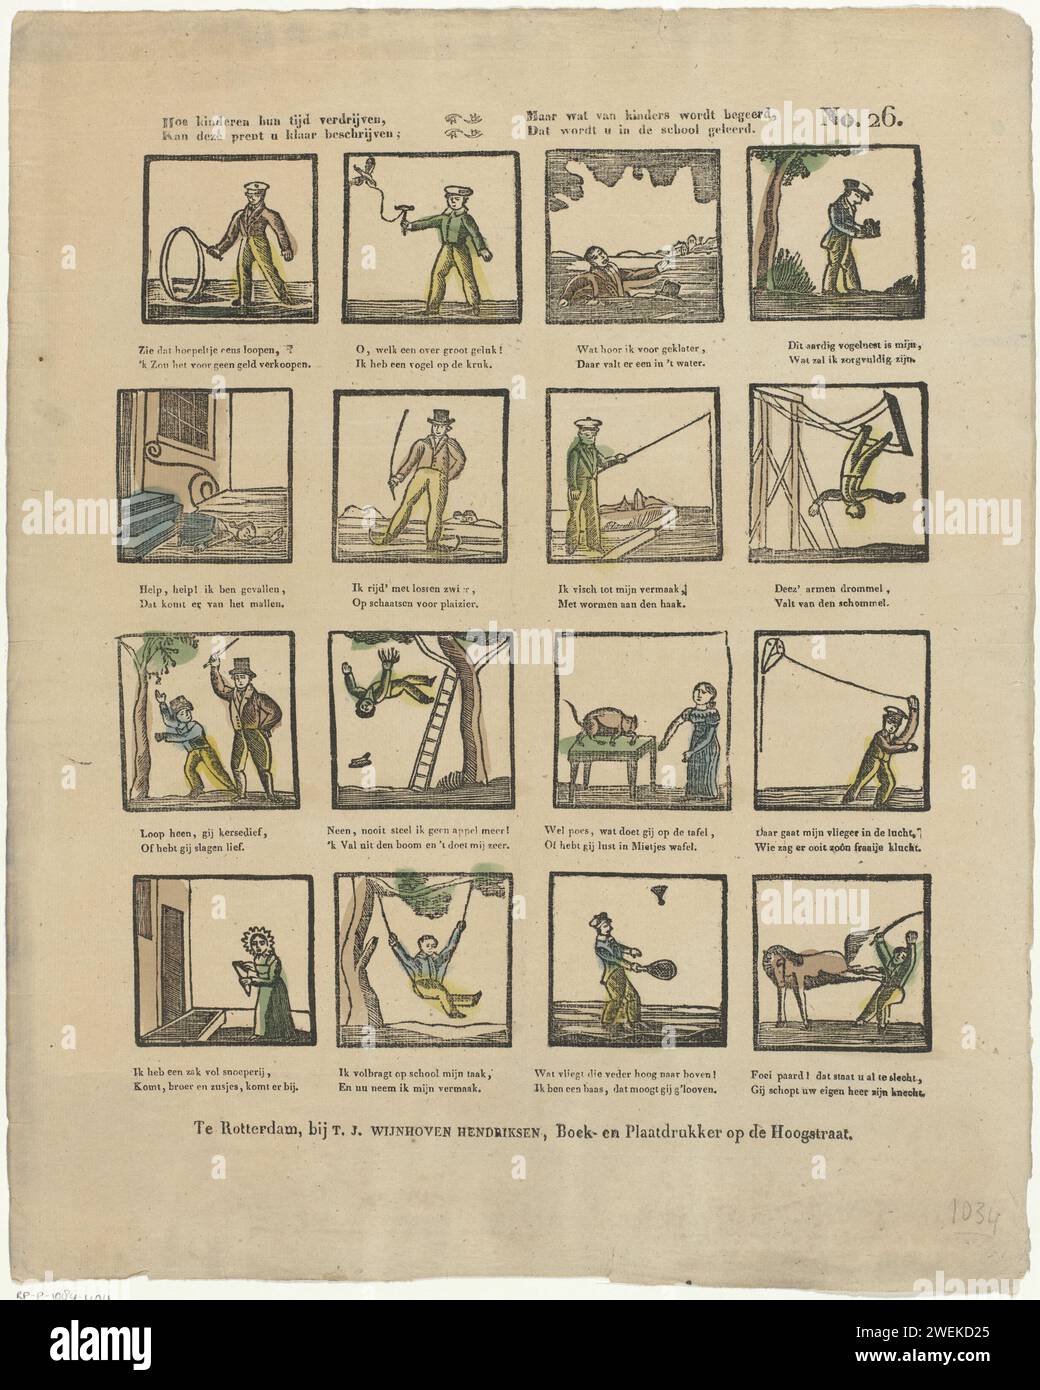 How children expel their time, / can this print describe you ready; / But what is coveted by children, / you will be taught in the school, 1832 - 1850 print Leaf with 16 performances of children's games, including, hoops, skating and kites. Under each image a two -way verse. Numbered at the top right: No. 26.  paper letterpress printing children's games and plays. games using special objects (marbles, top, hoop, etc.). skates (winter sports). child playing with animals Stock Photo